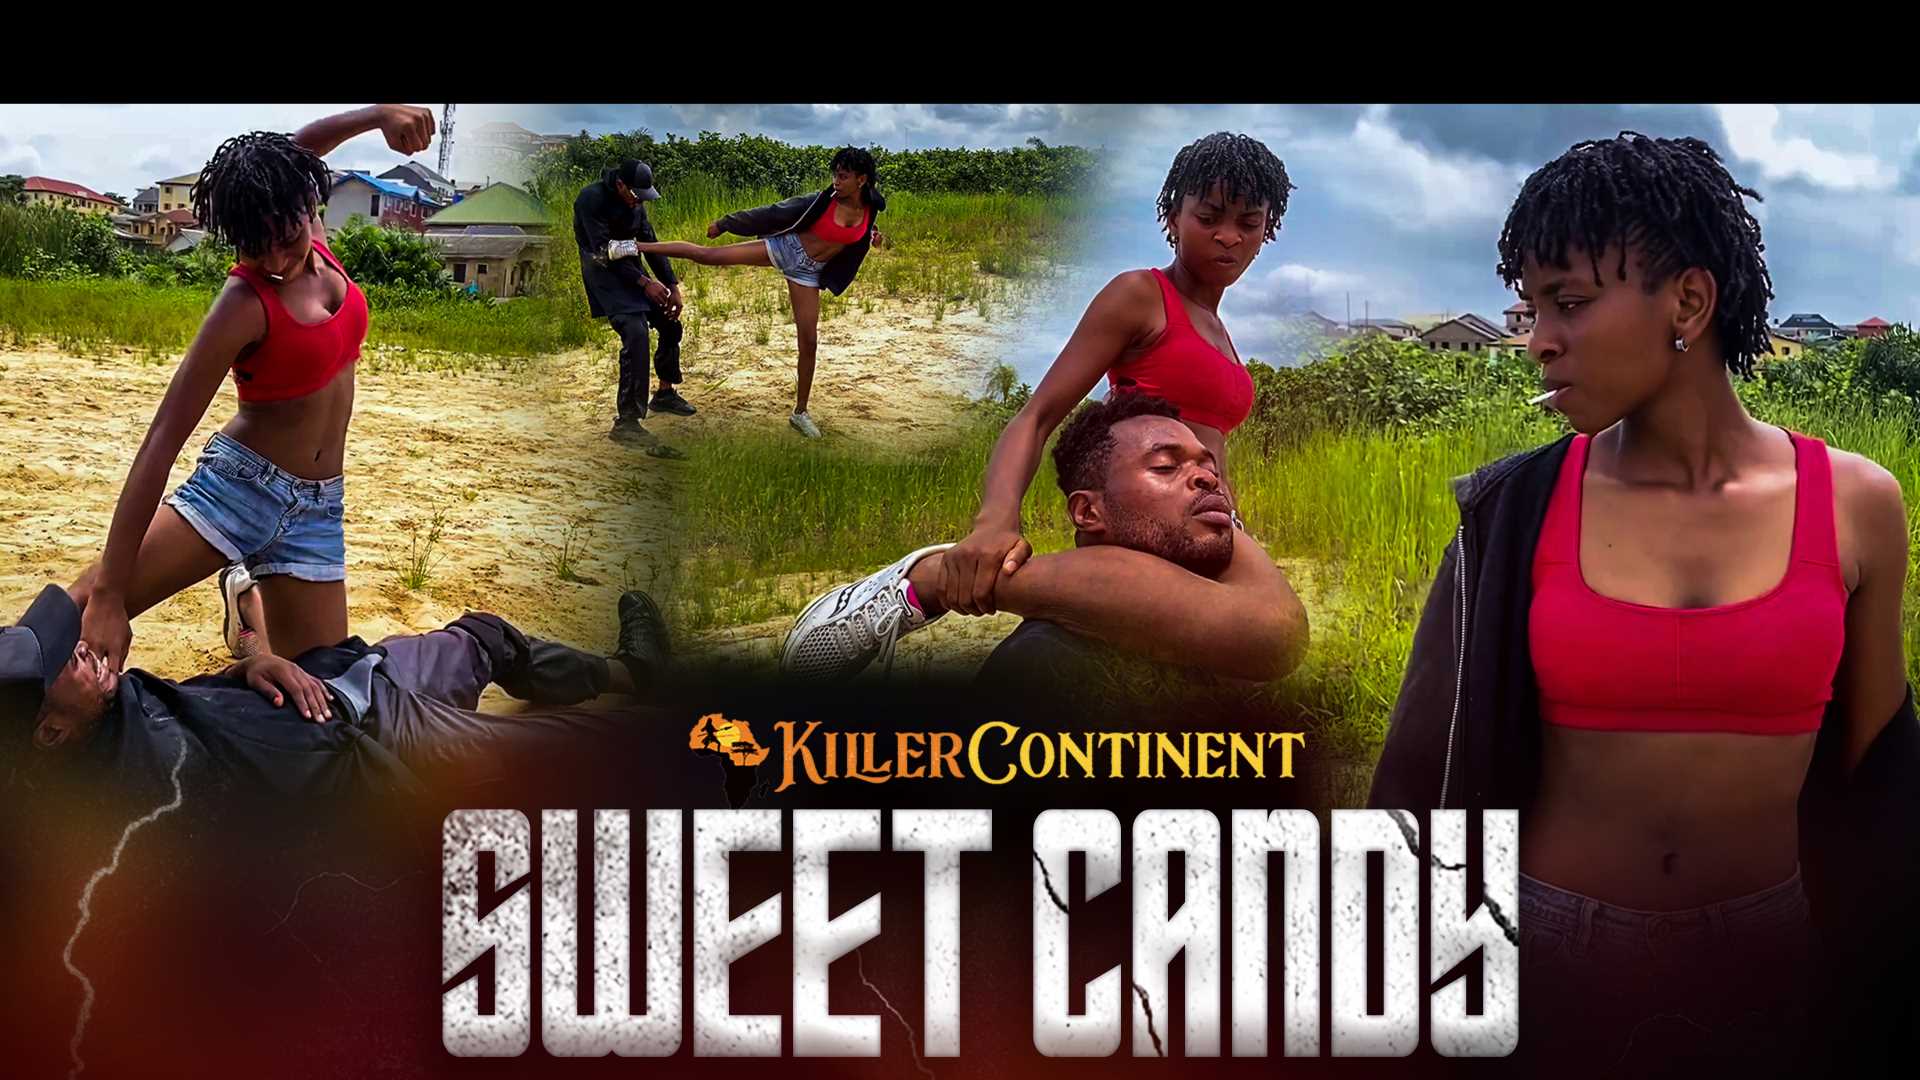 #10 - Sweet Candy